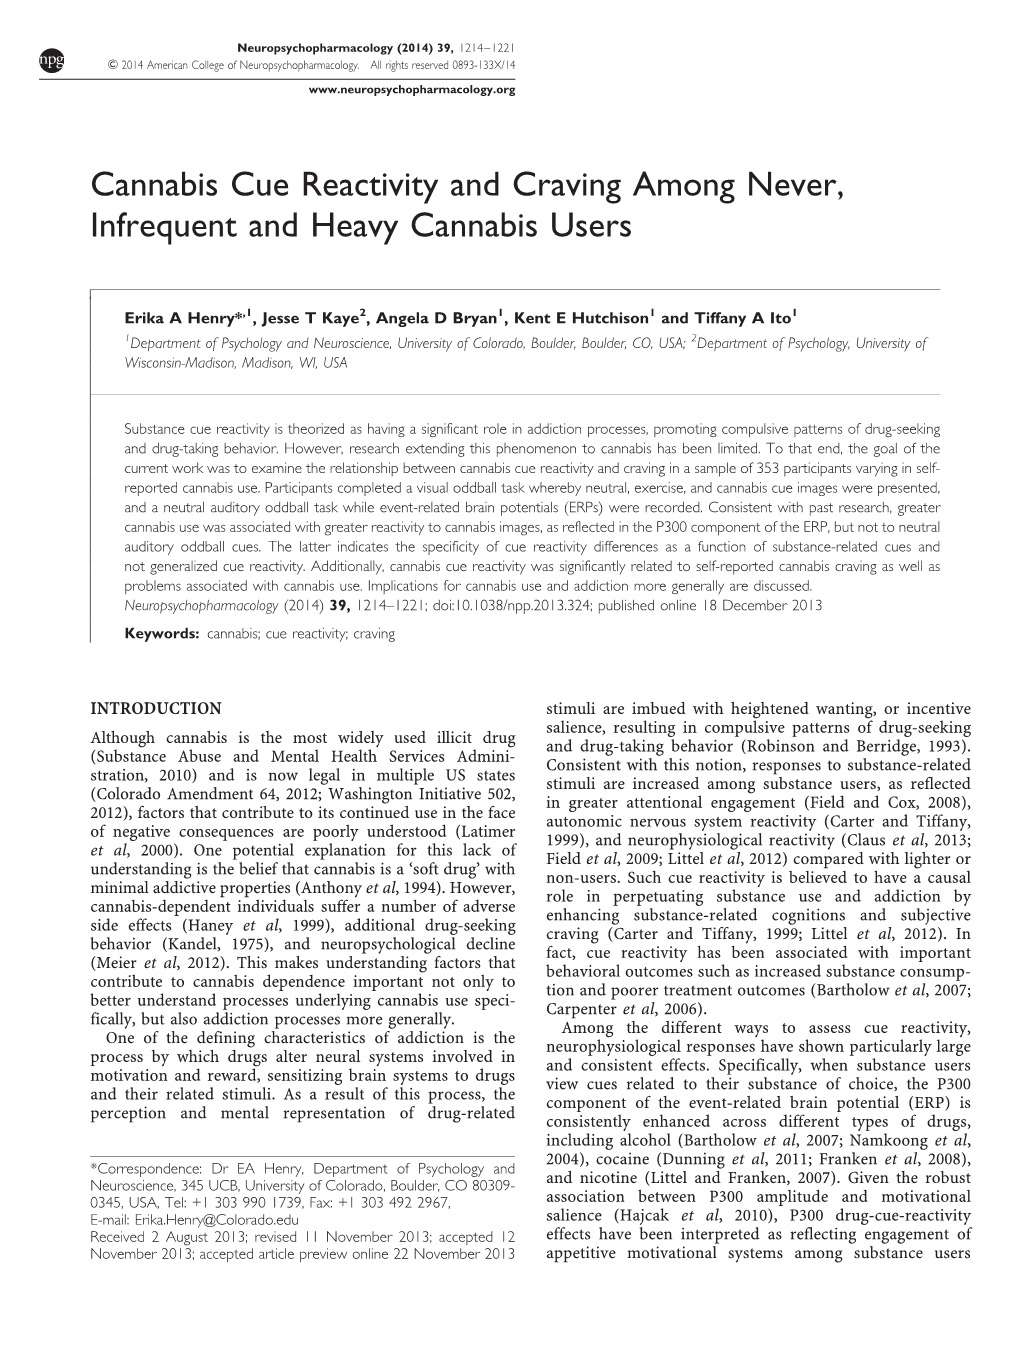 Cannabis Cue Reactivity and Craving Among Never, Infrequent and Heavy Cannabis Users